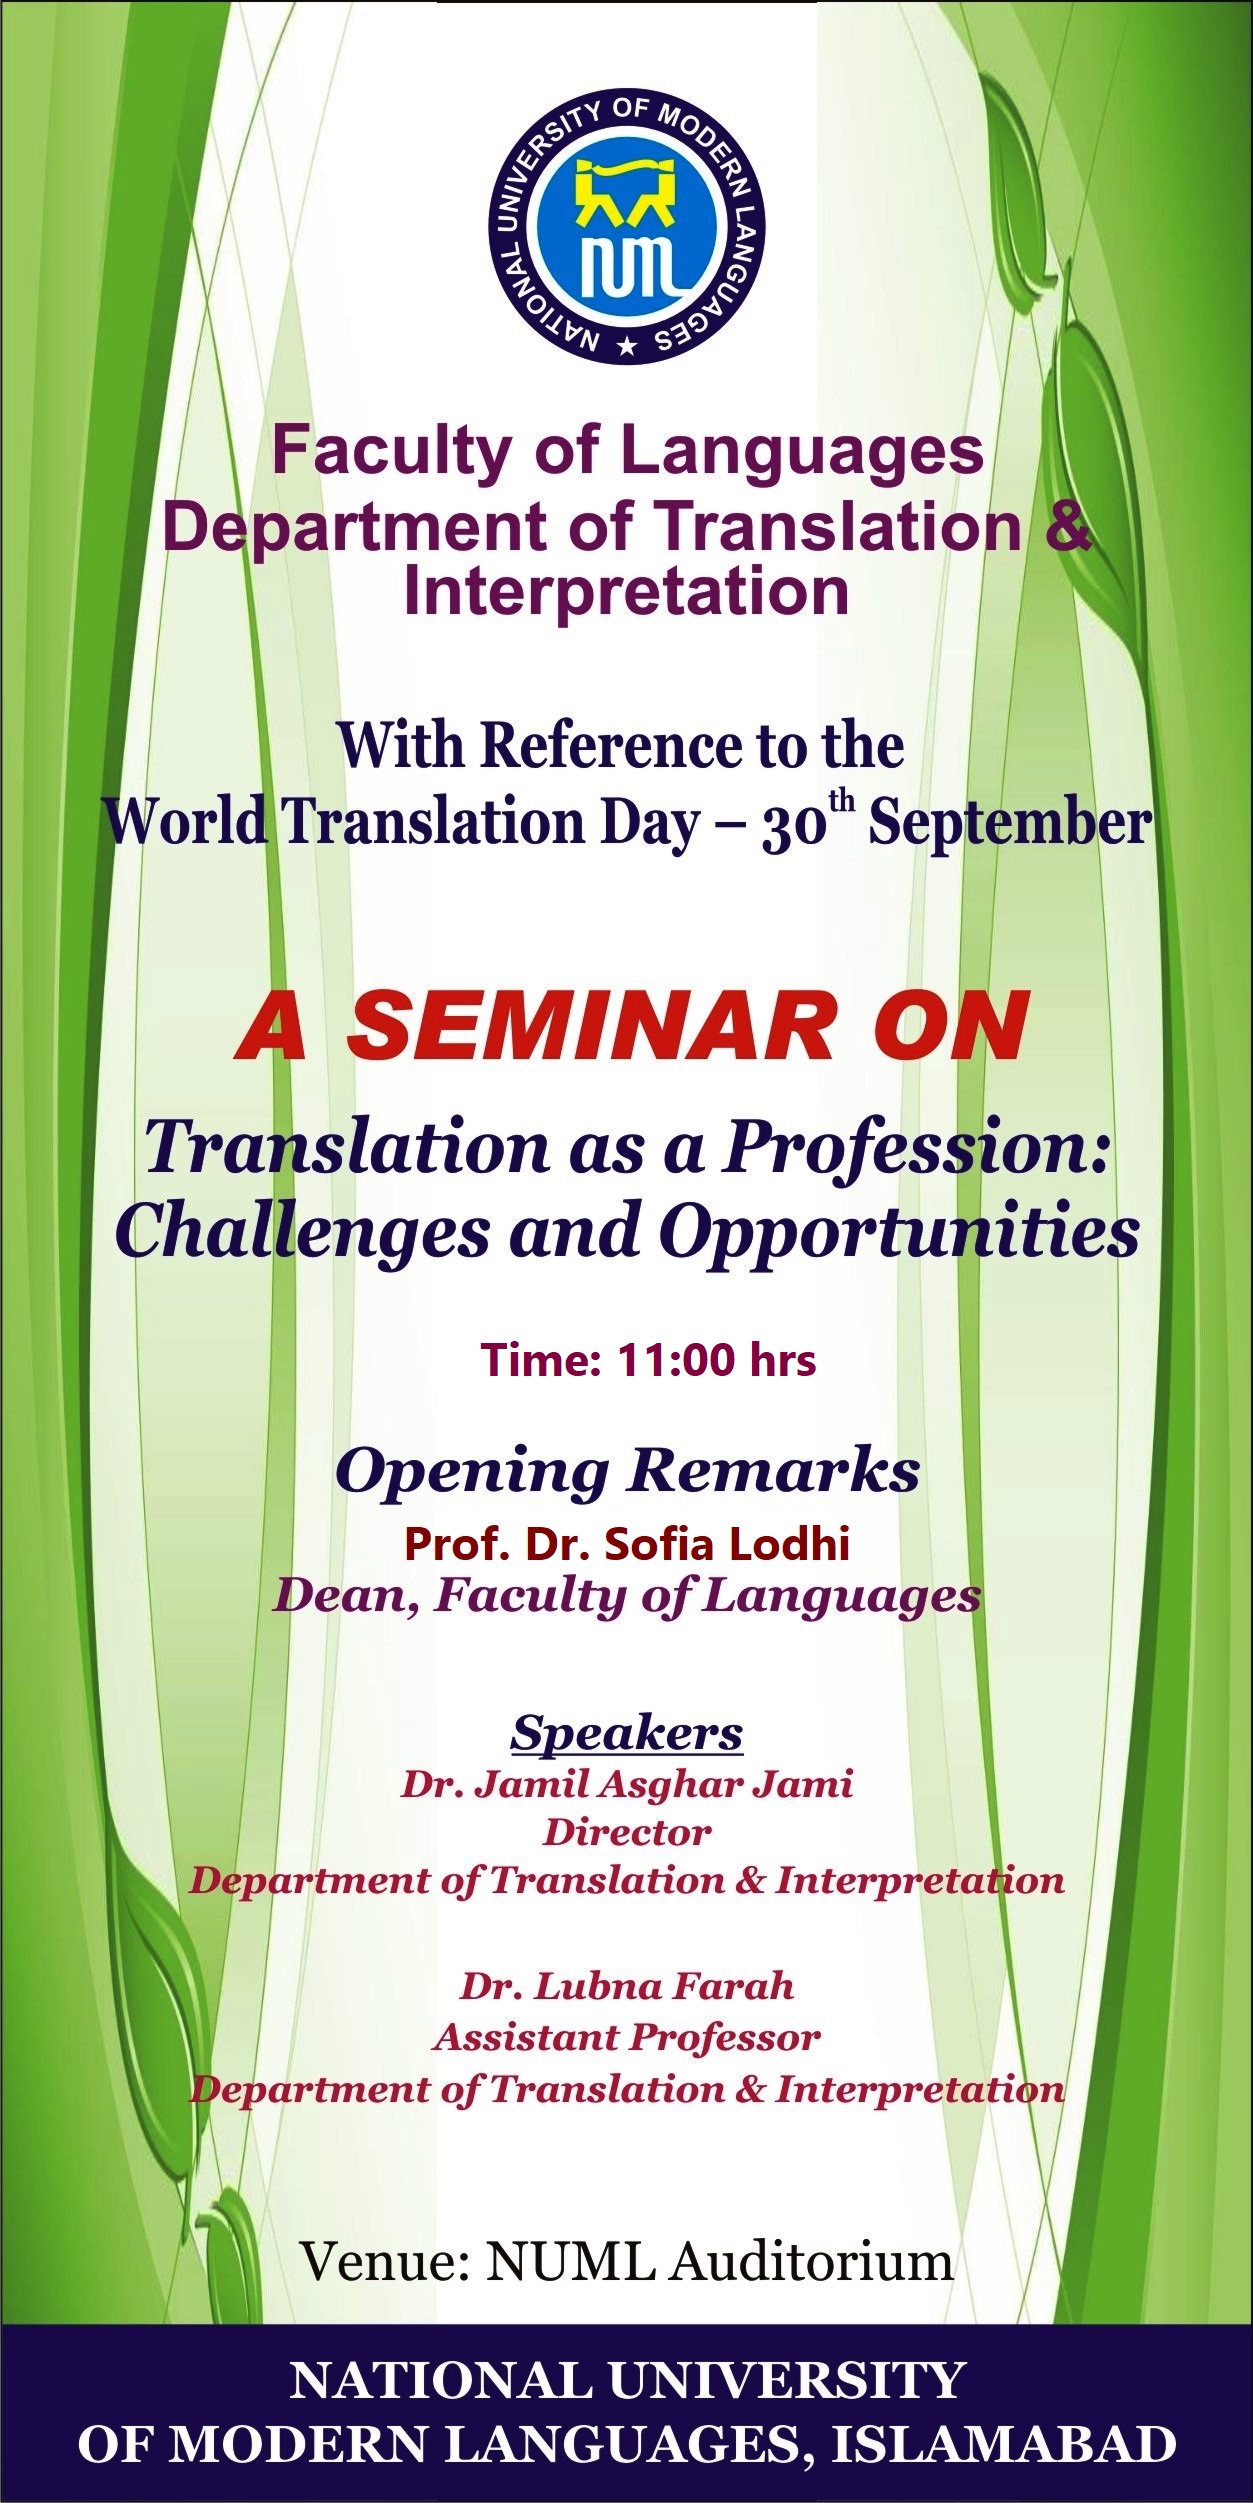 Seminar on Translation as a Profession: Challenges and Opportunities